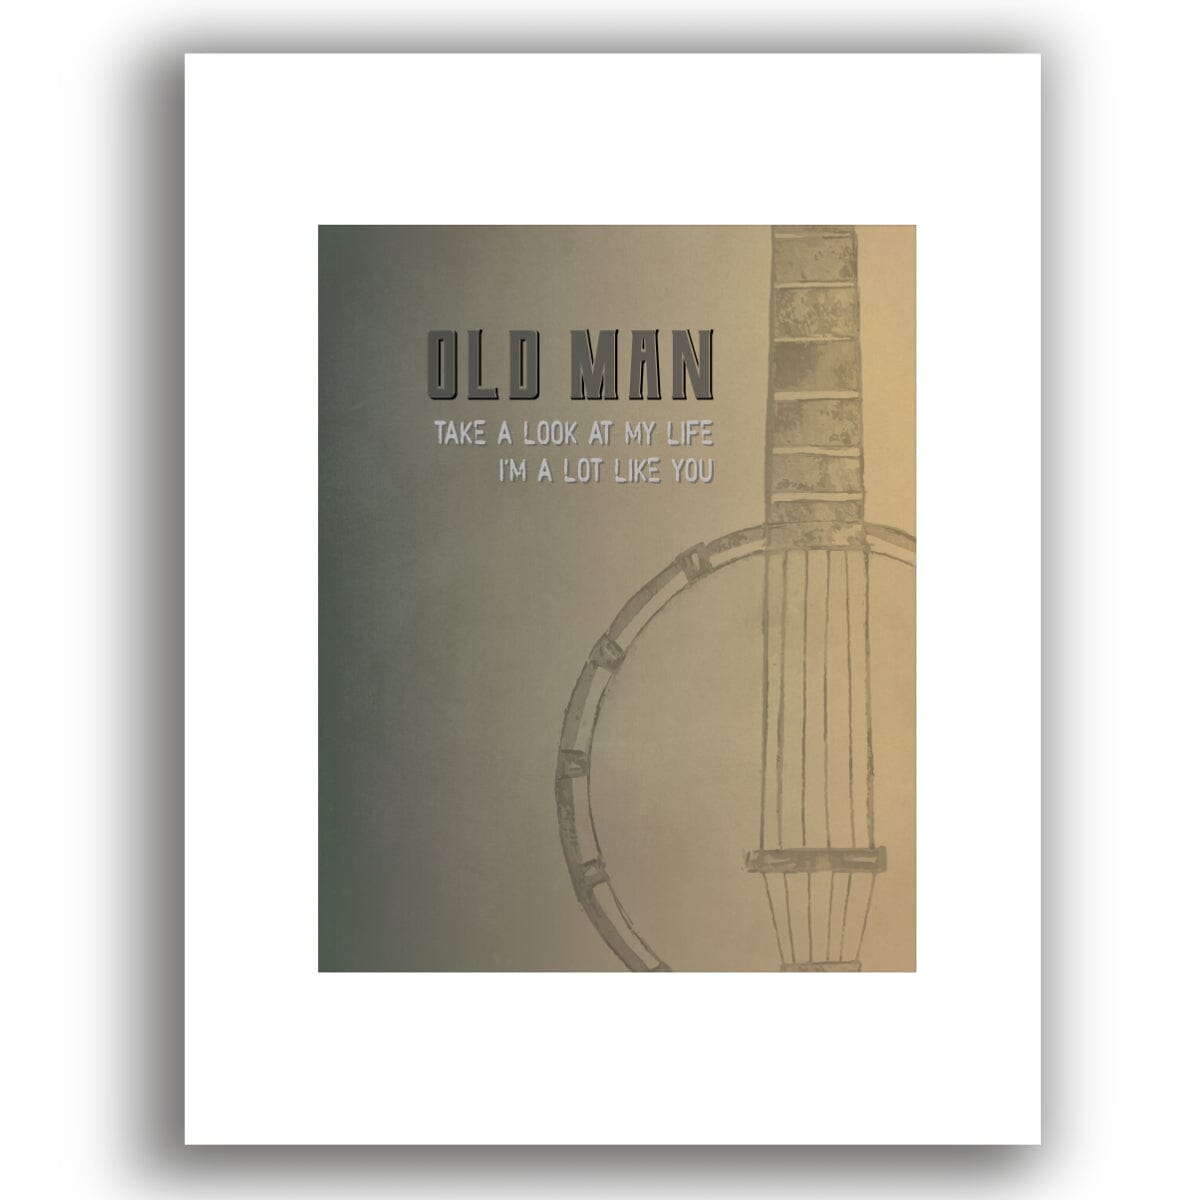 Old Man by Neil Young - Lyric Inspired Classic Rock Print Song Lyrics Art Song Lyrics Art 8x10 White Matted Unframed Print 